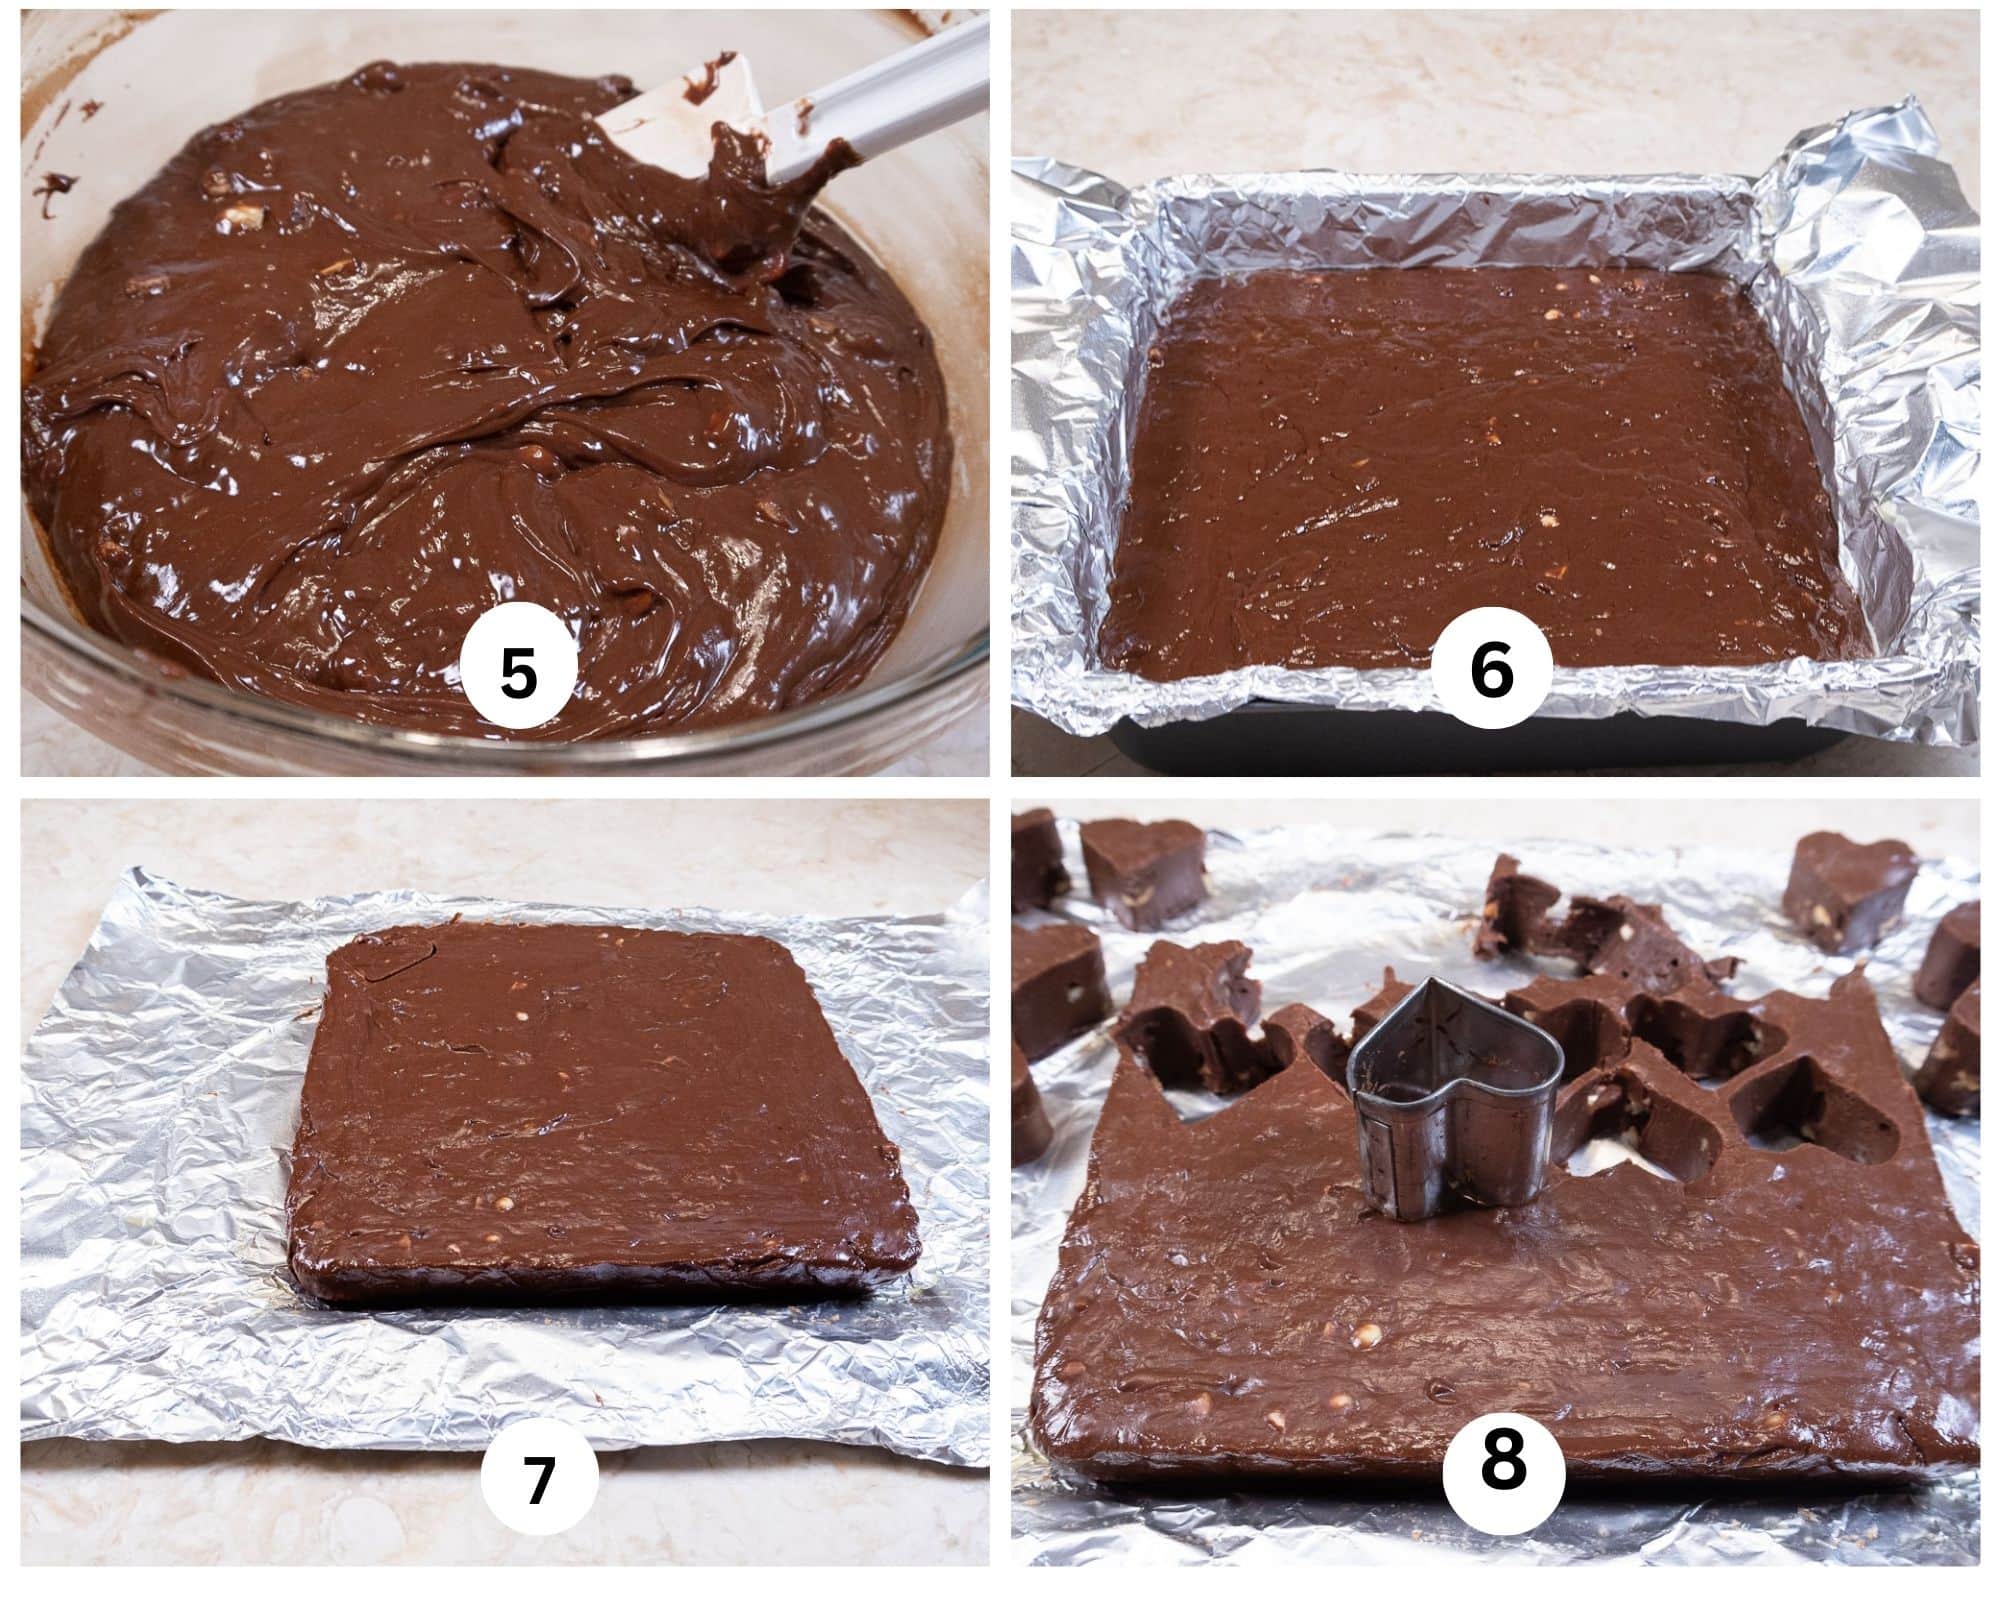 The second collage shows the fudge mixed, poured into the pan, the foil turned down and the fudge cut into hearts. 